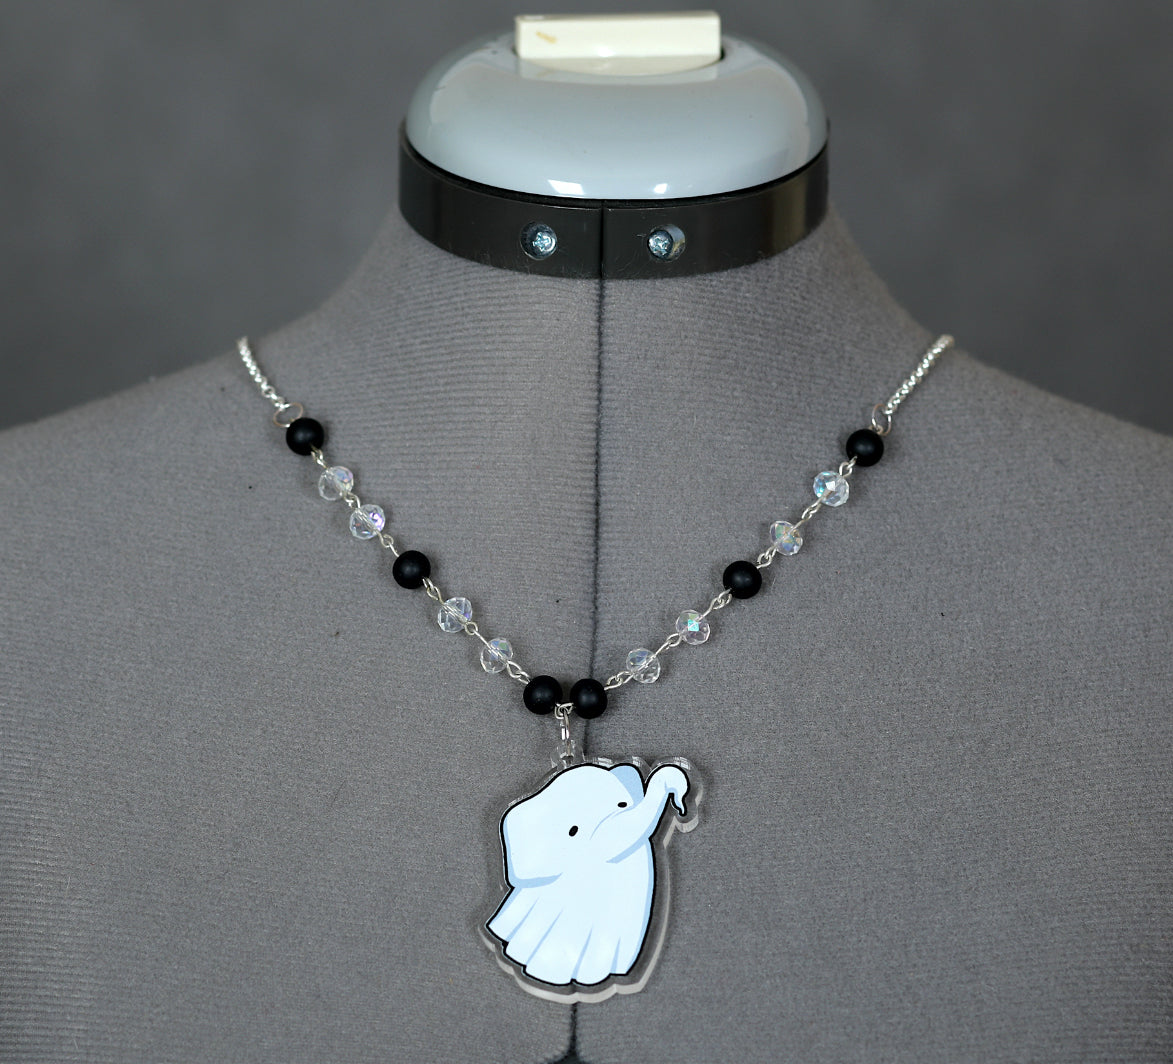 Spooky Party at the Zoo Necklace (5 Animals) - Lolita Collective